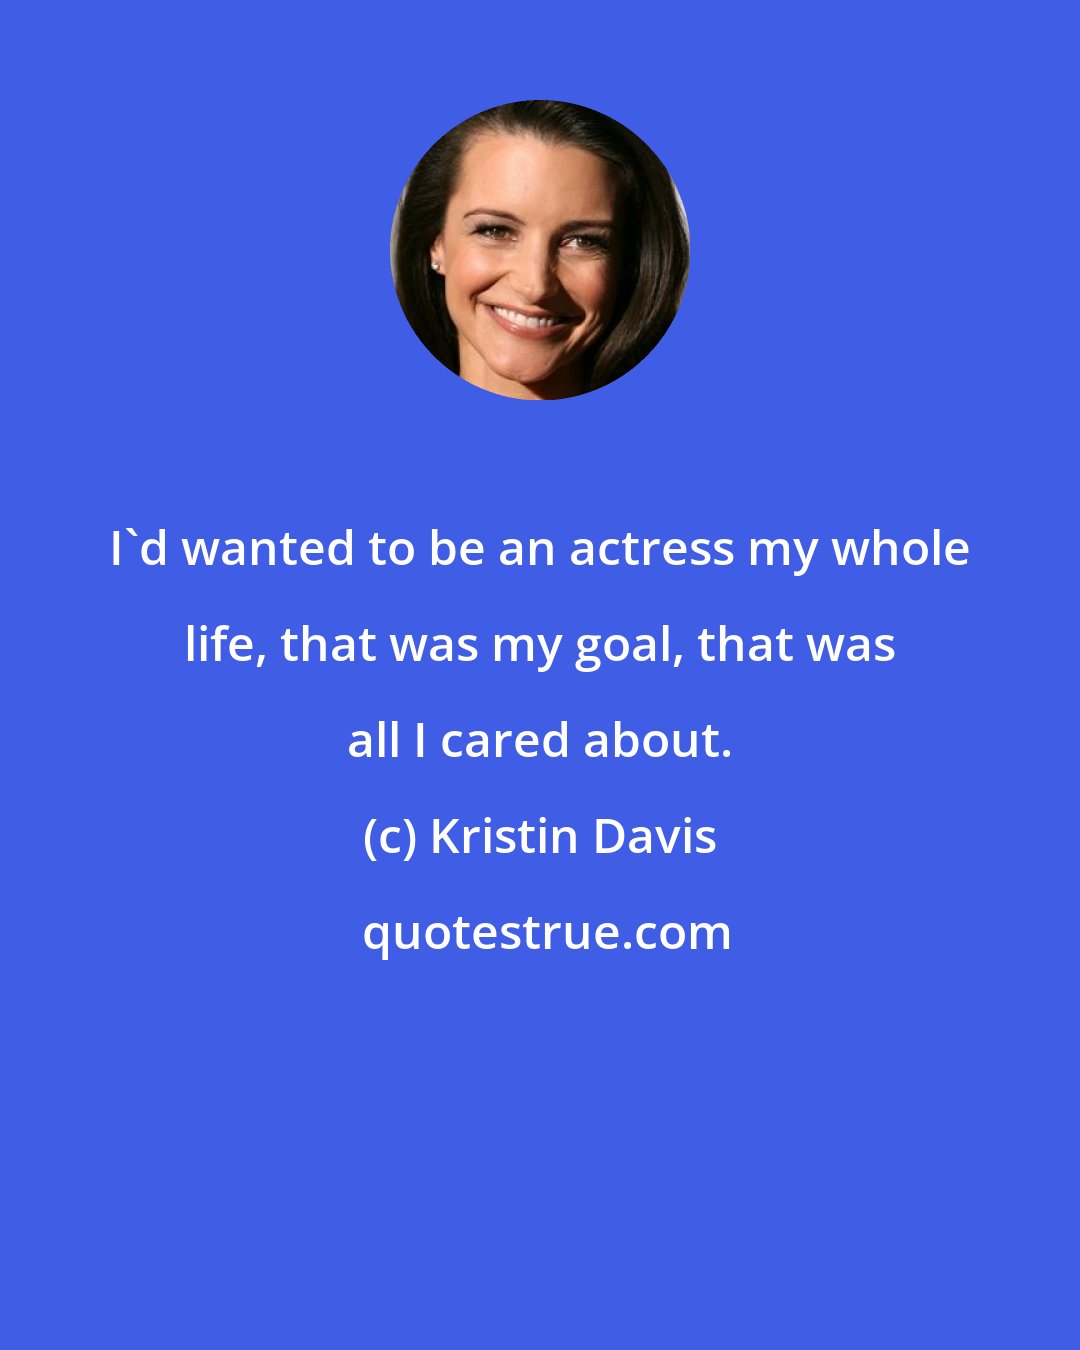 Kristin Davis: I'd wanted to be an actress my whole life, that was my goal, that was all I cared about.